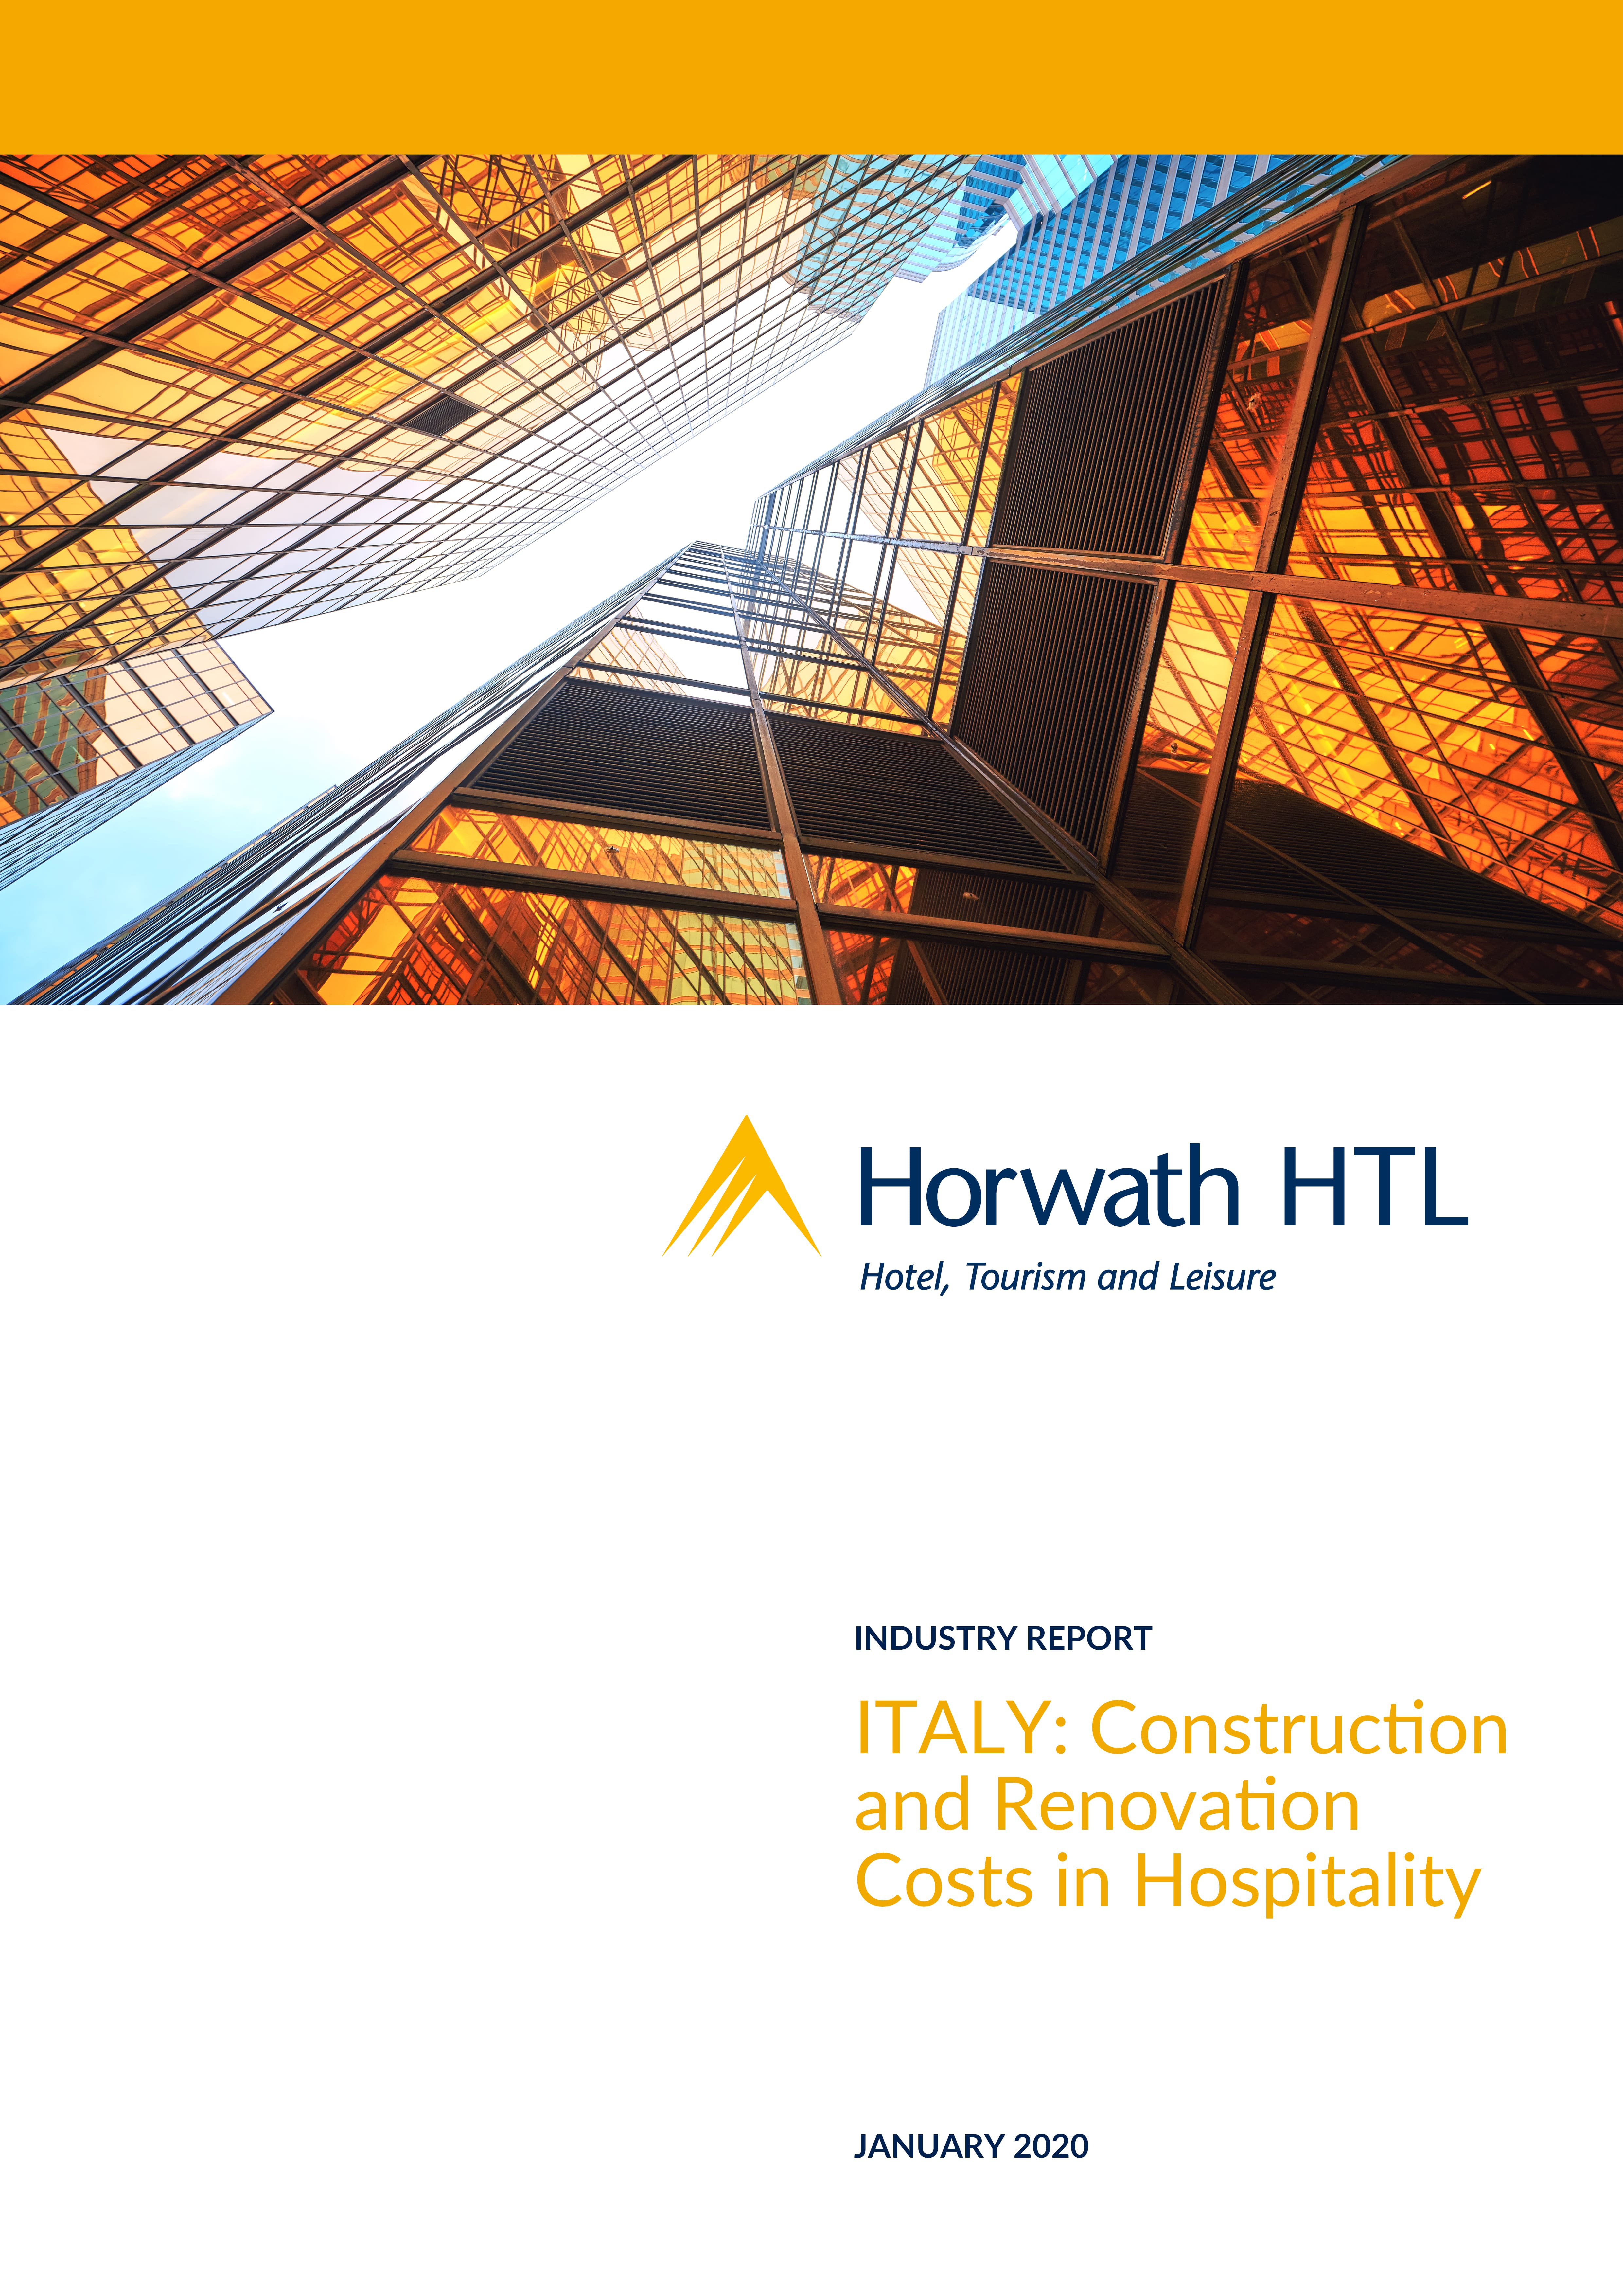 Industry Report ITALY Construction Renovation Costs